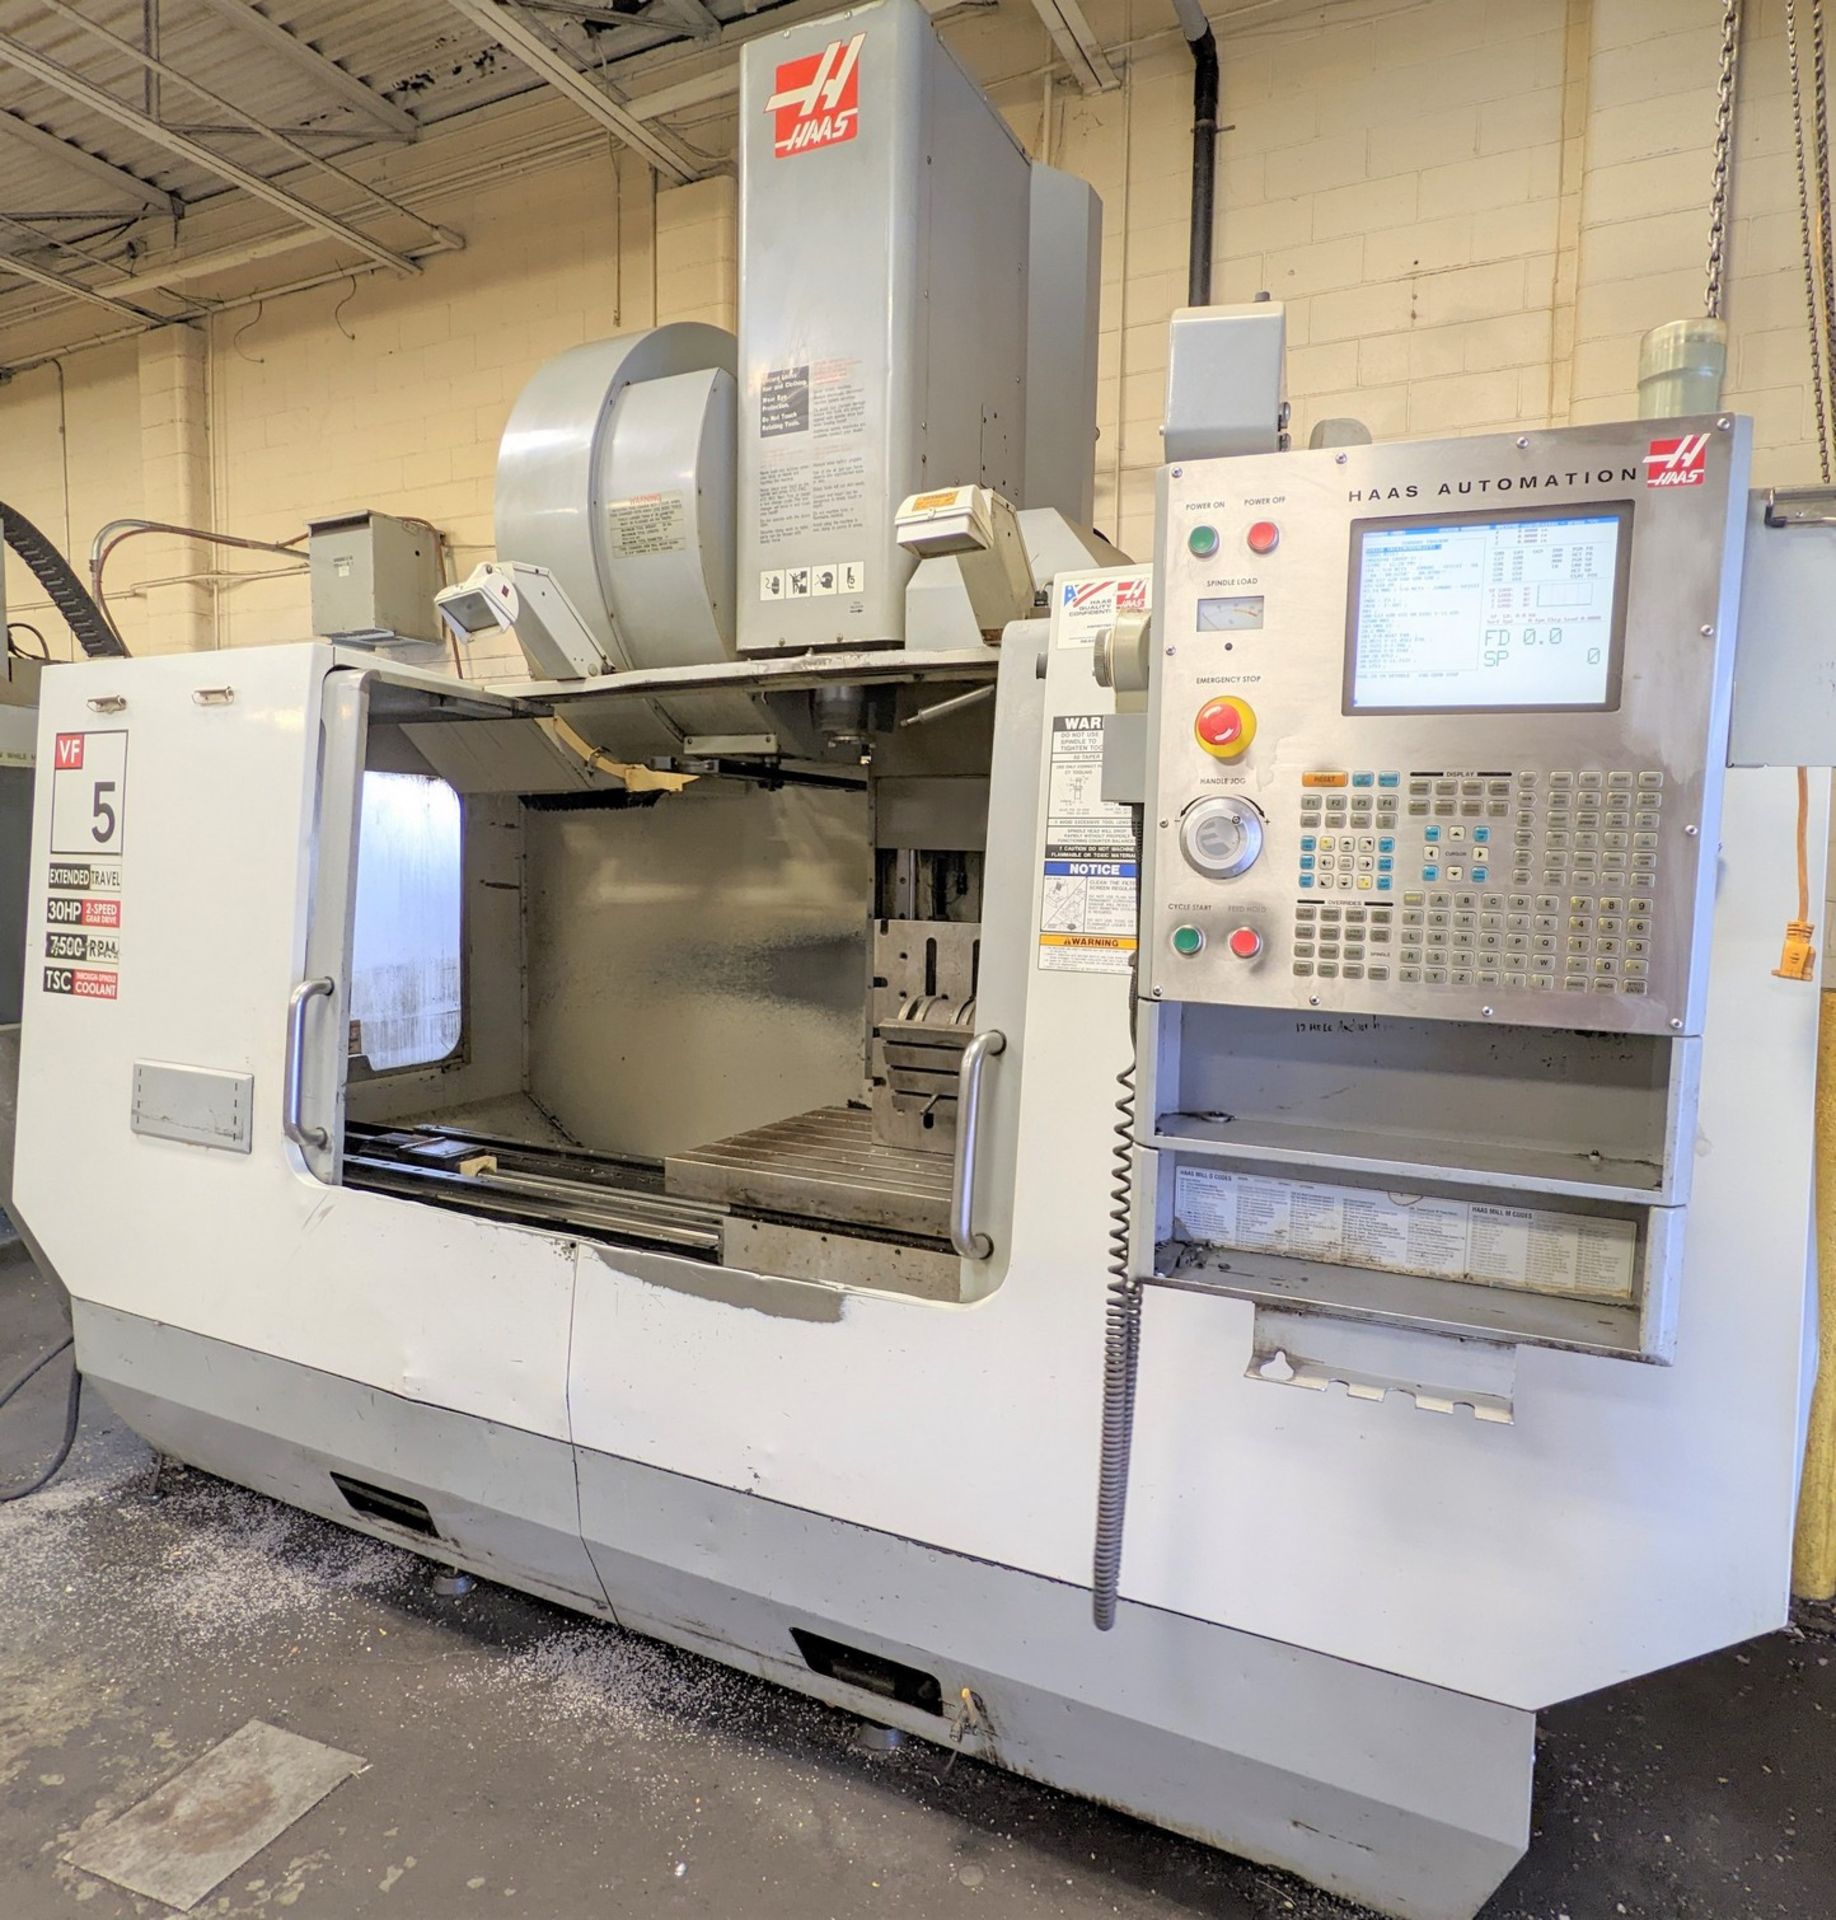 2005 HAAS VF-5/50XT CNC VERTICAL MACHINING CENTER, CNC CONTROL, TRAVELS: X-60”, Y-26”, Z-25”, CAT50, - Image 3 of 15